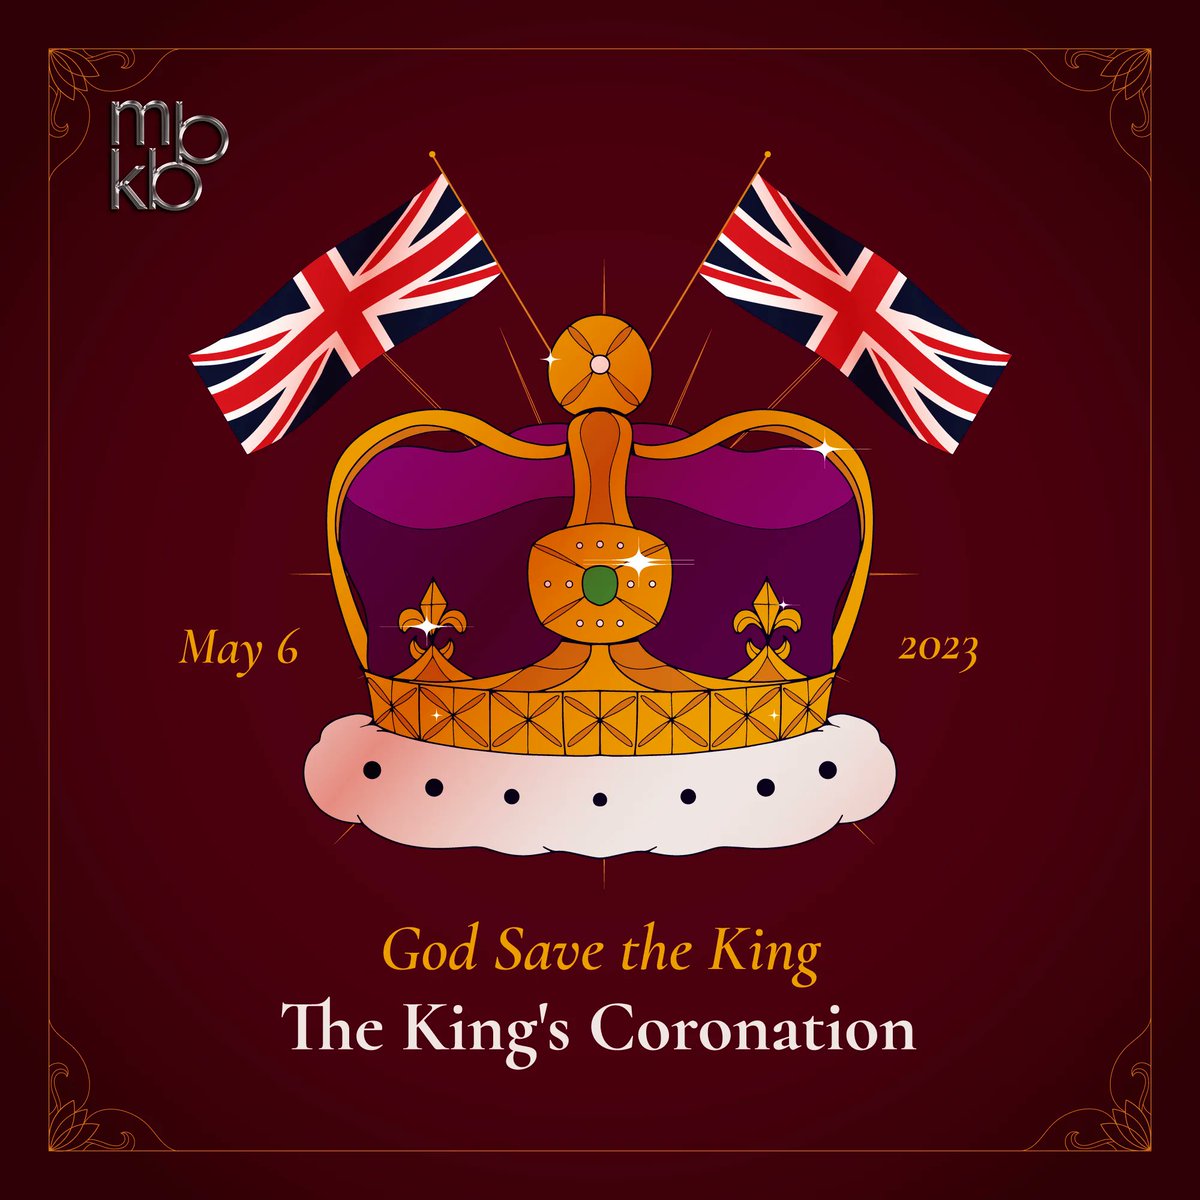 We along with the rest of the country join in, in celebrating His Majesty the King and The Queen Consort's coronation!

#HisMajestyKingCharlesIII #LongMayHeReign #GodSaveTheKing #Coronation #CoronationConcert #CoronationWeekend

Image by buff.ly/3GVdgRY Freepik